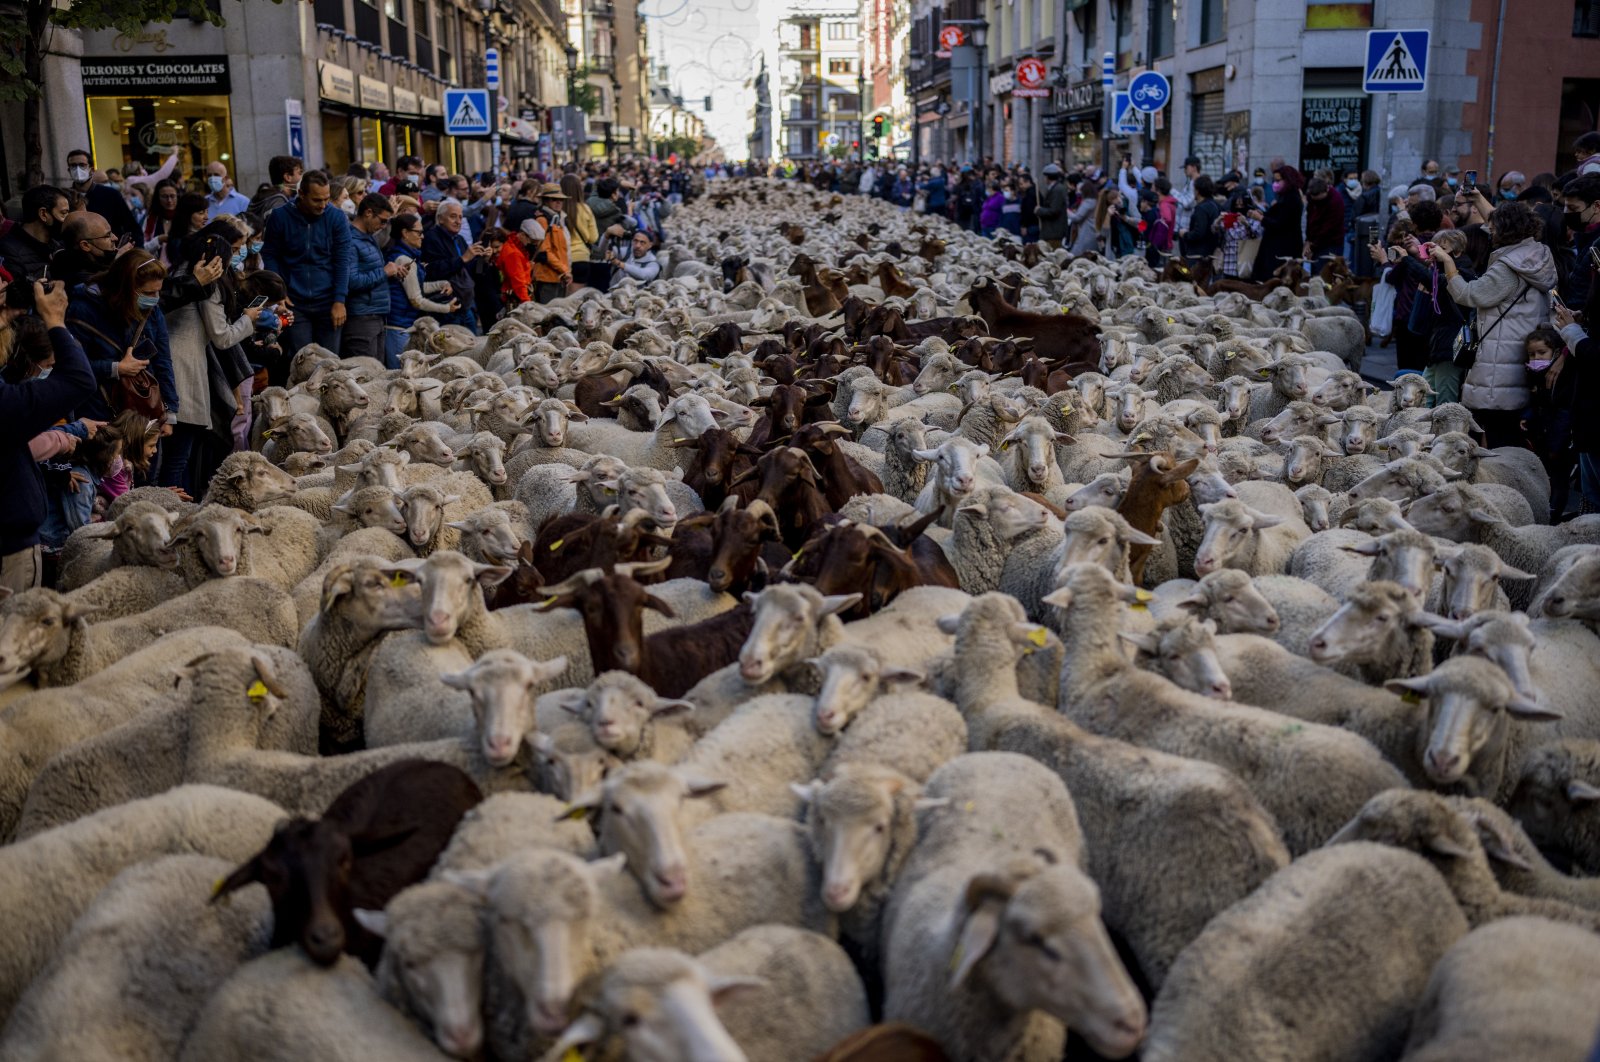 A herd of sheep is guided through central Madrid, Spain, Sunday, Oct. 24, 2021. (AP Photo)